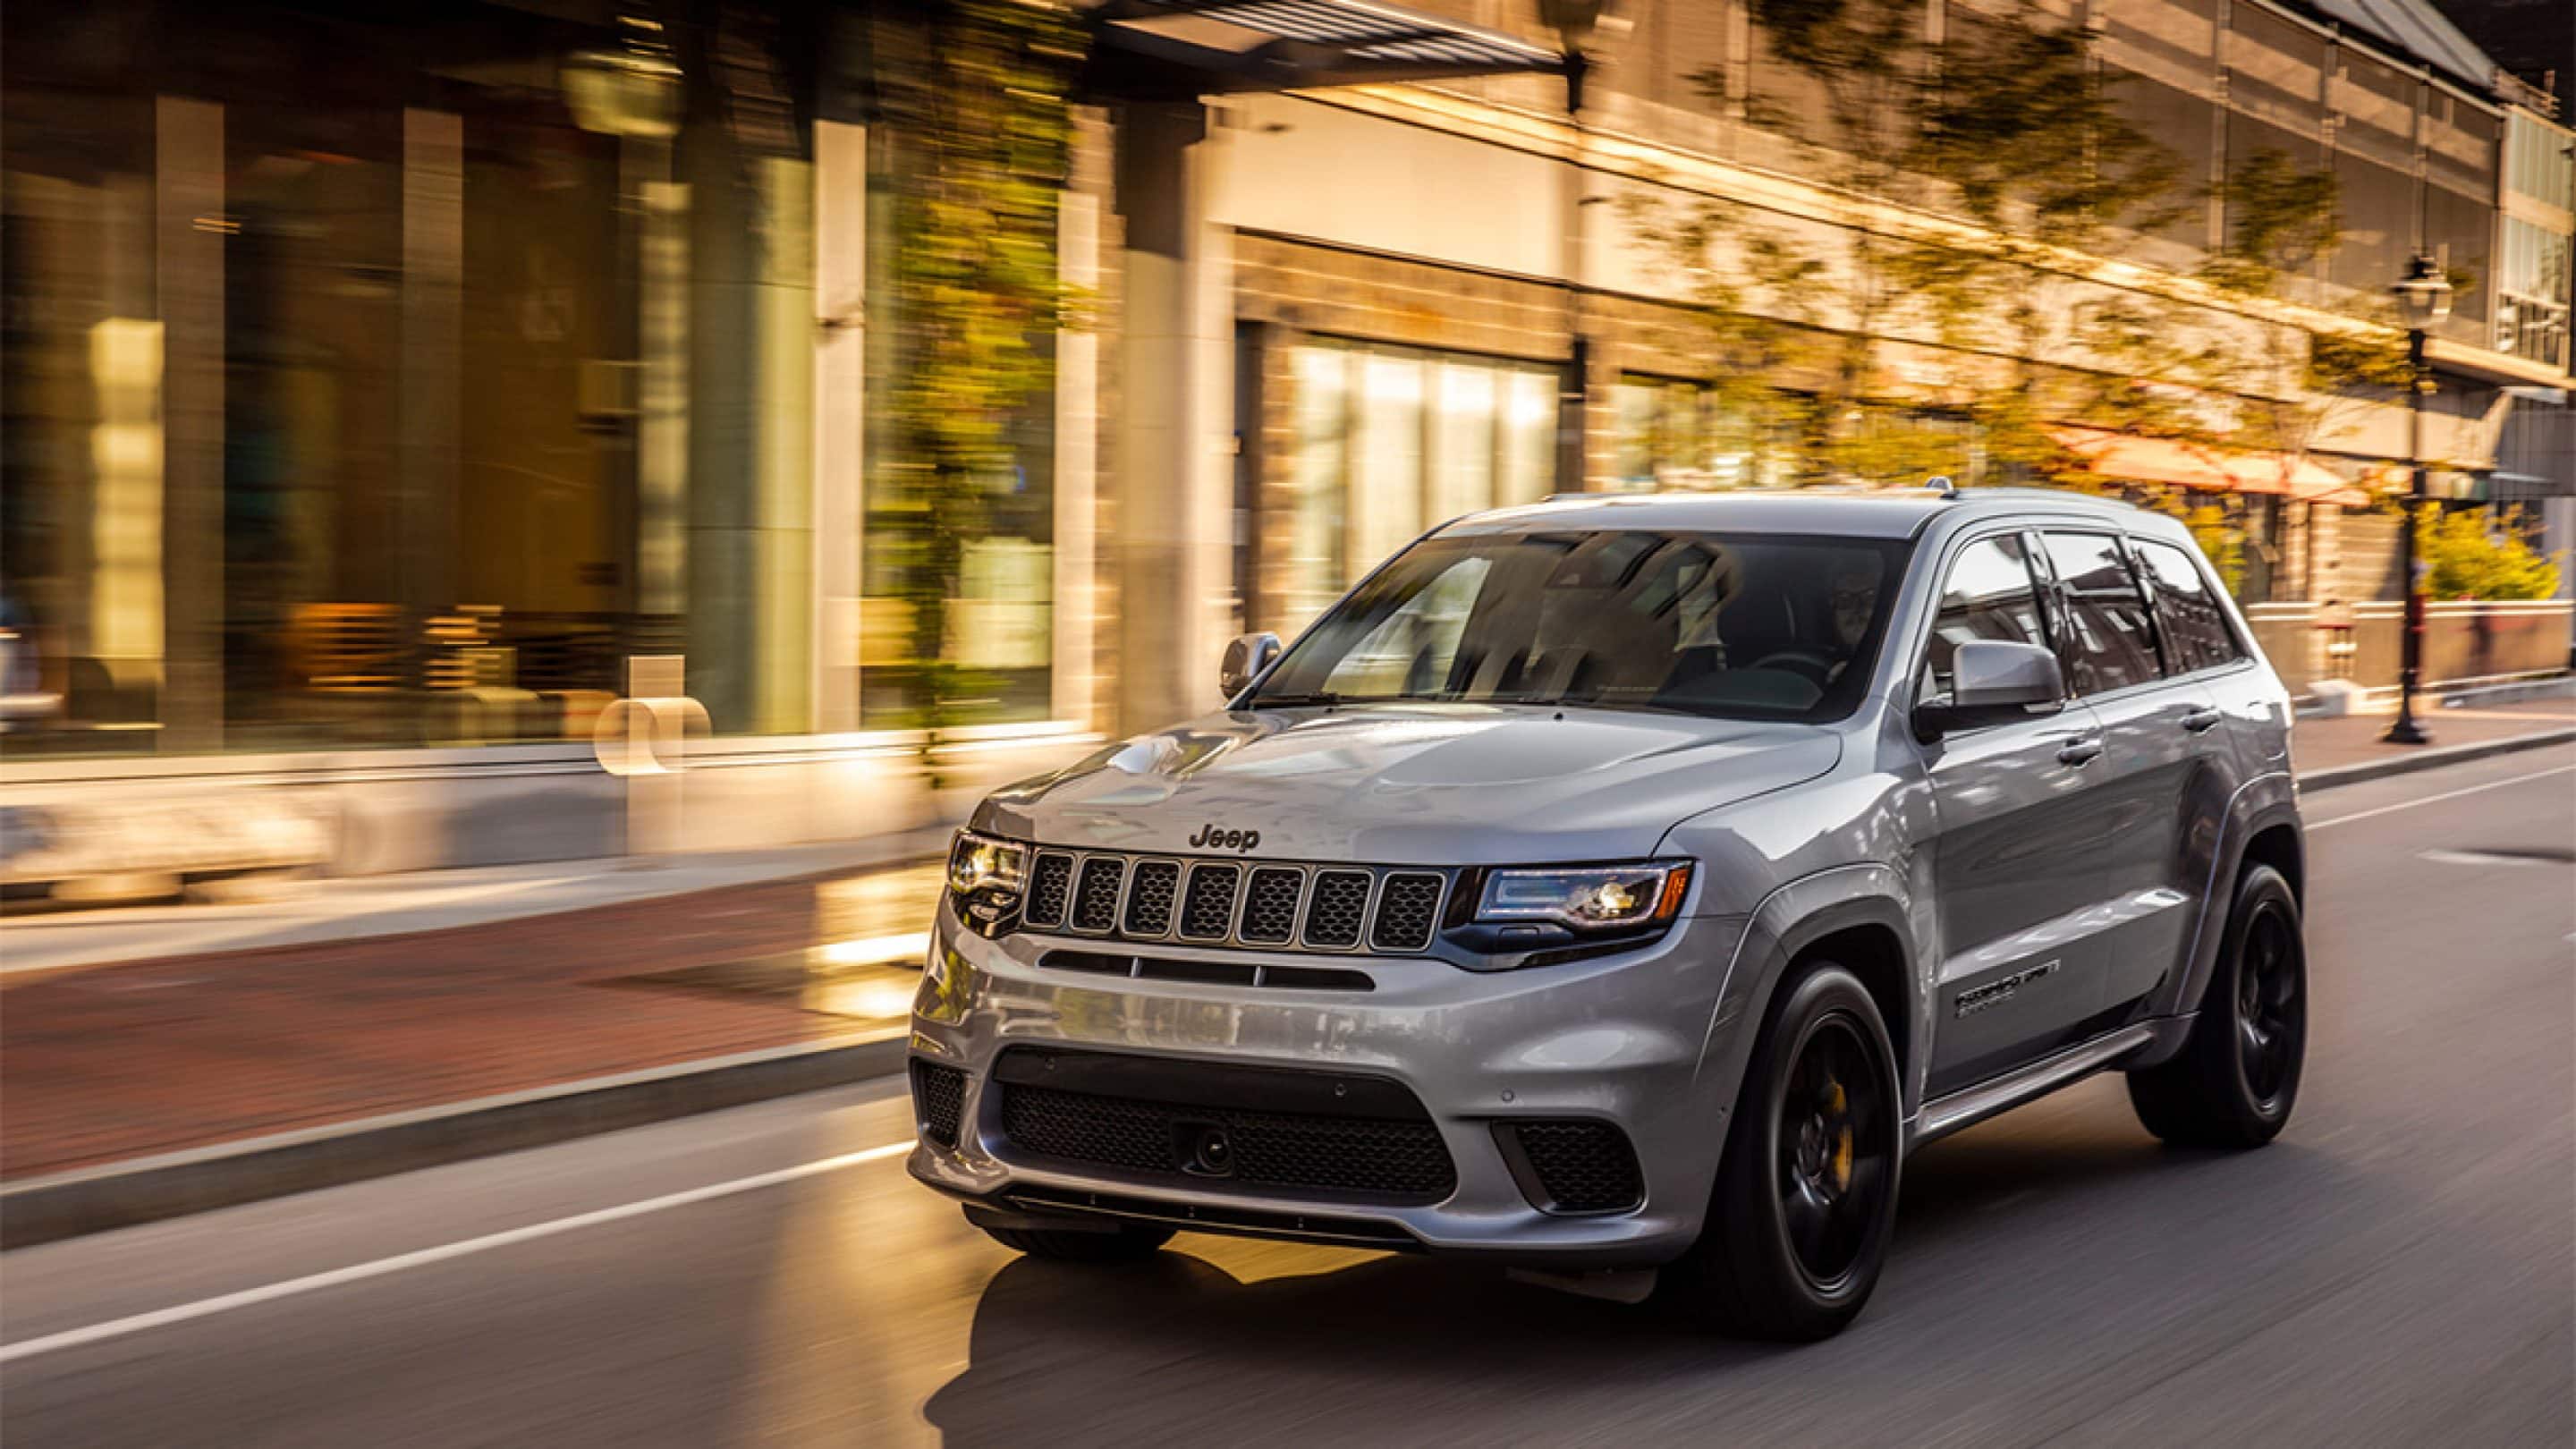 Trim Levels of the 2020 Jeep Grand Cherokee